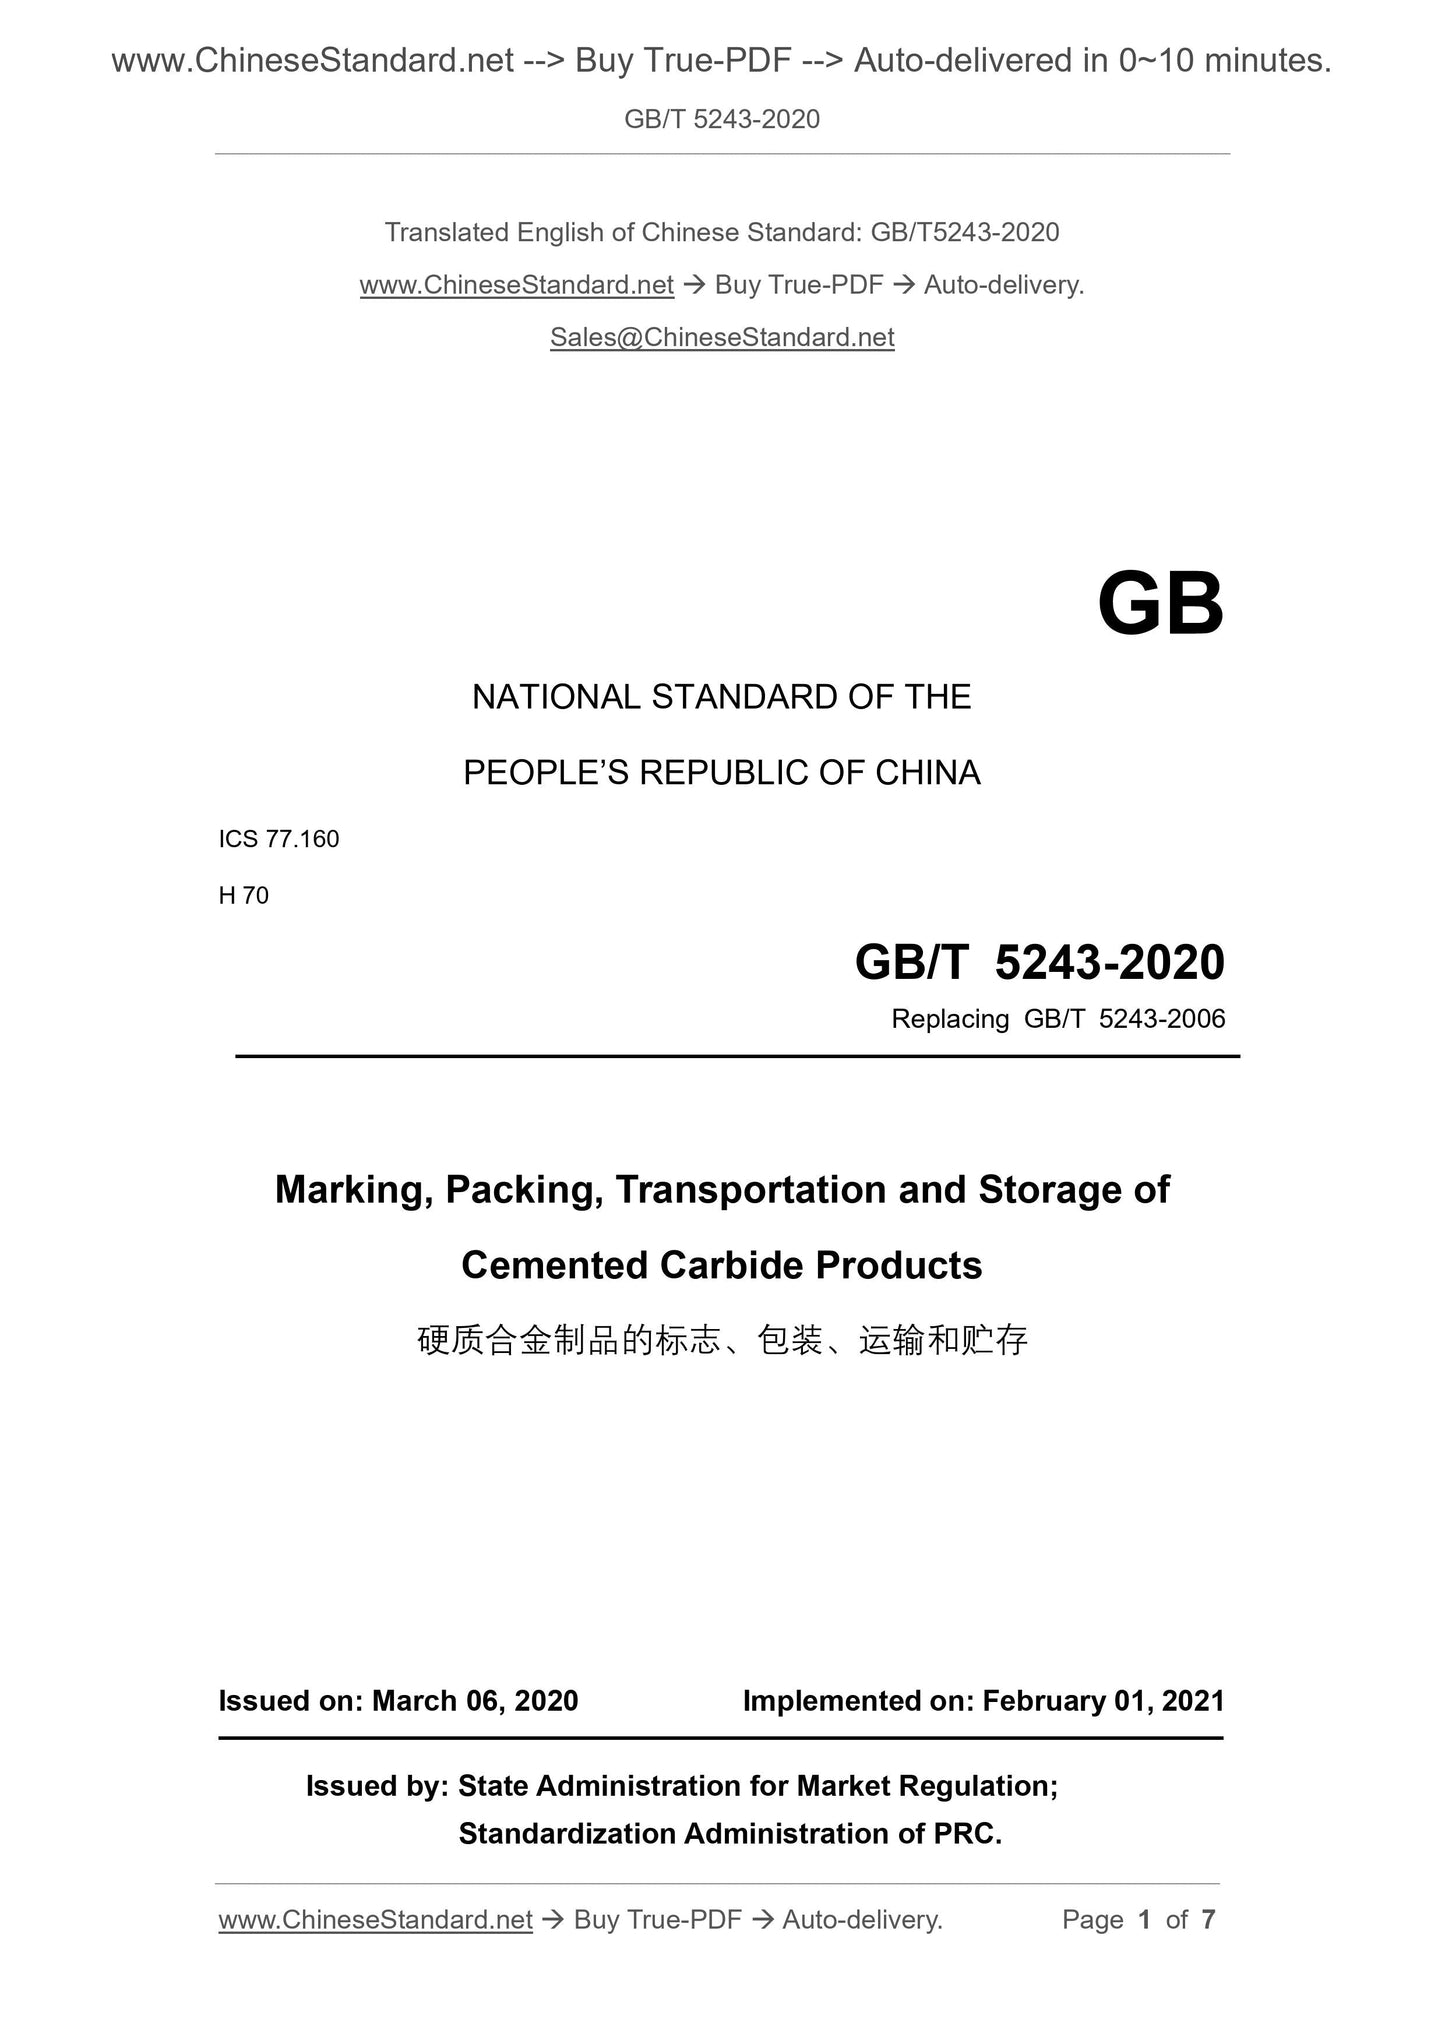 GB/T 5243-2020 Page 1